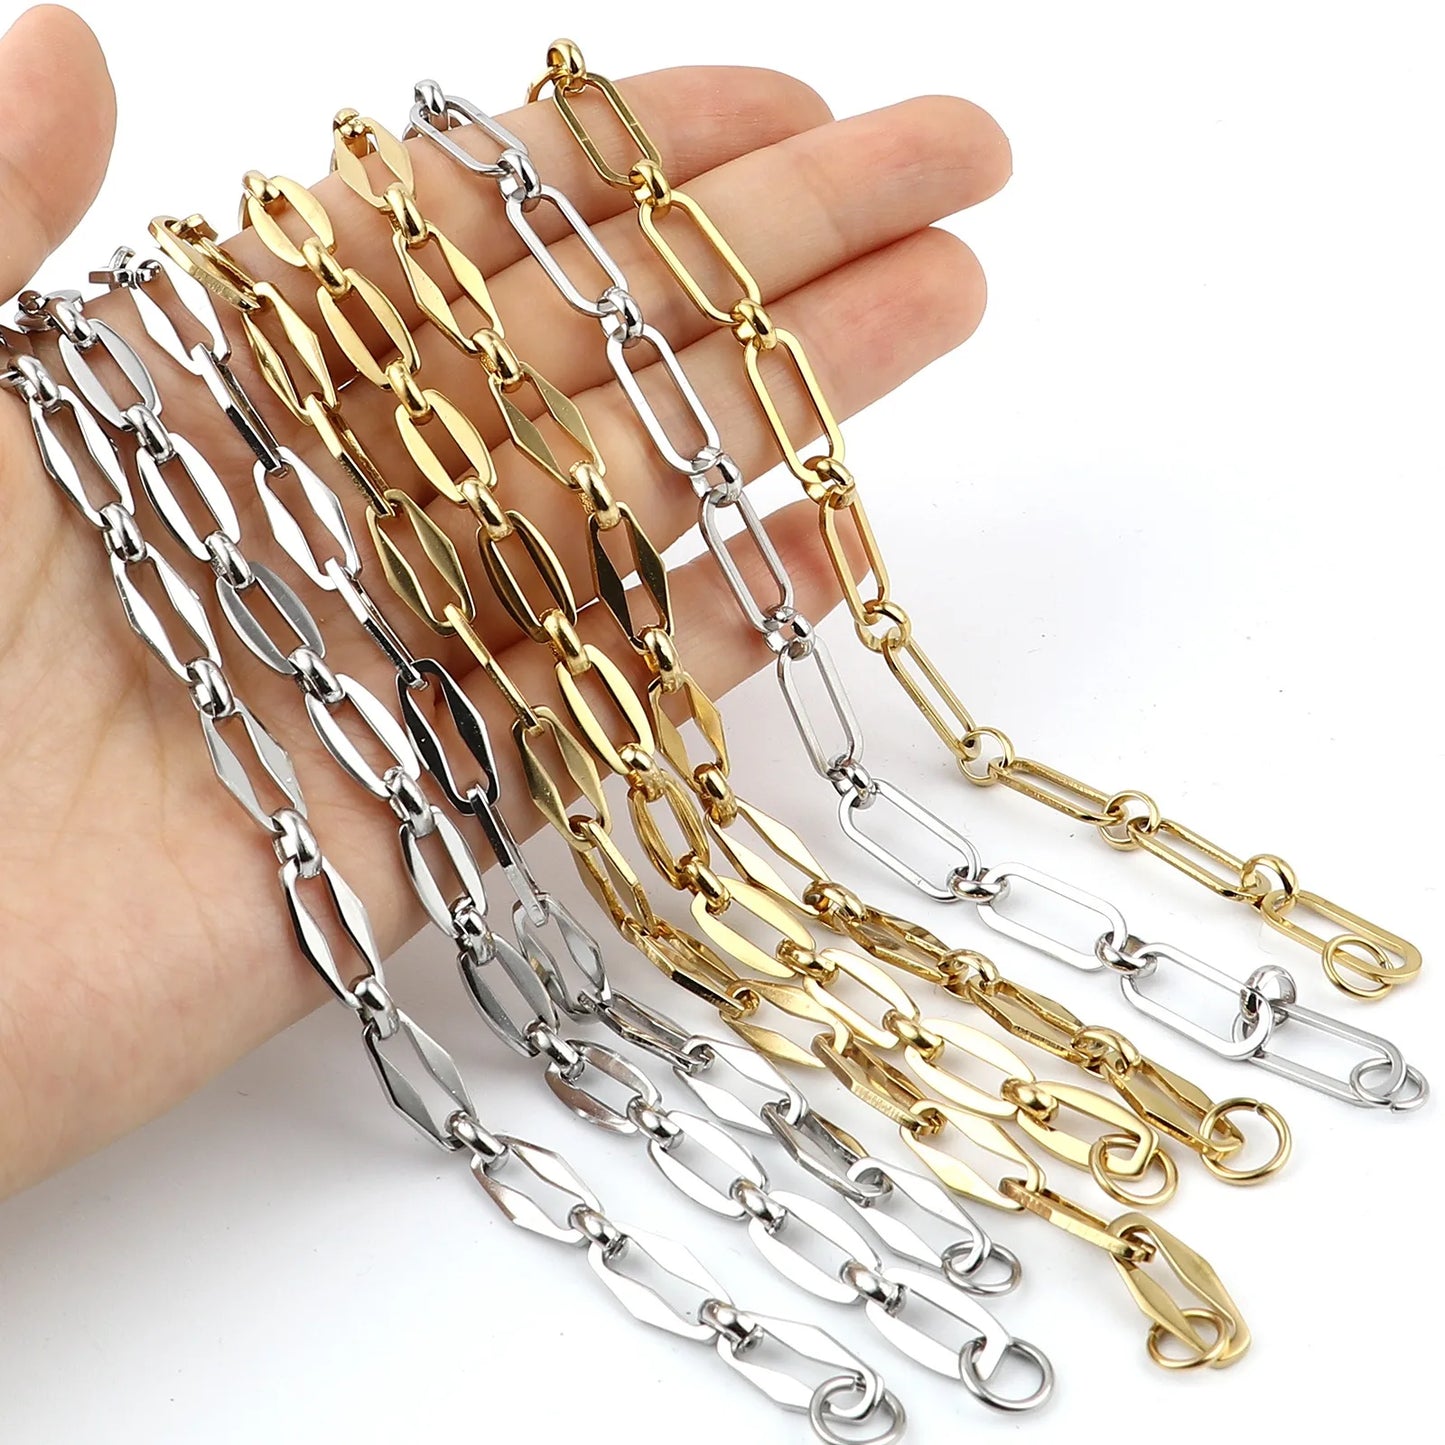 1PC 4mm New 304 Stainless Steel Link Cable Chain Bracelets For Women Men Gold Silver Color Oval Bracelet Jewelry Gift 19cm long